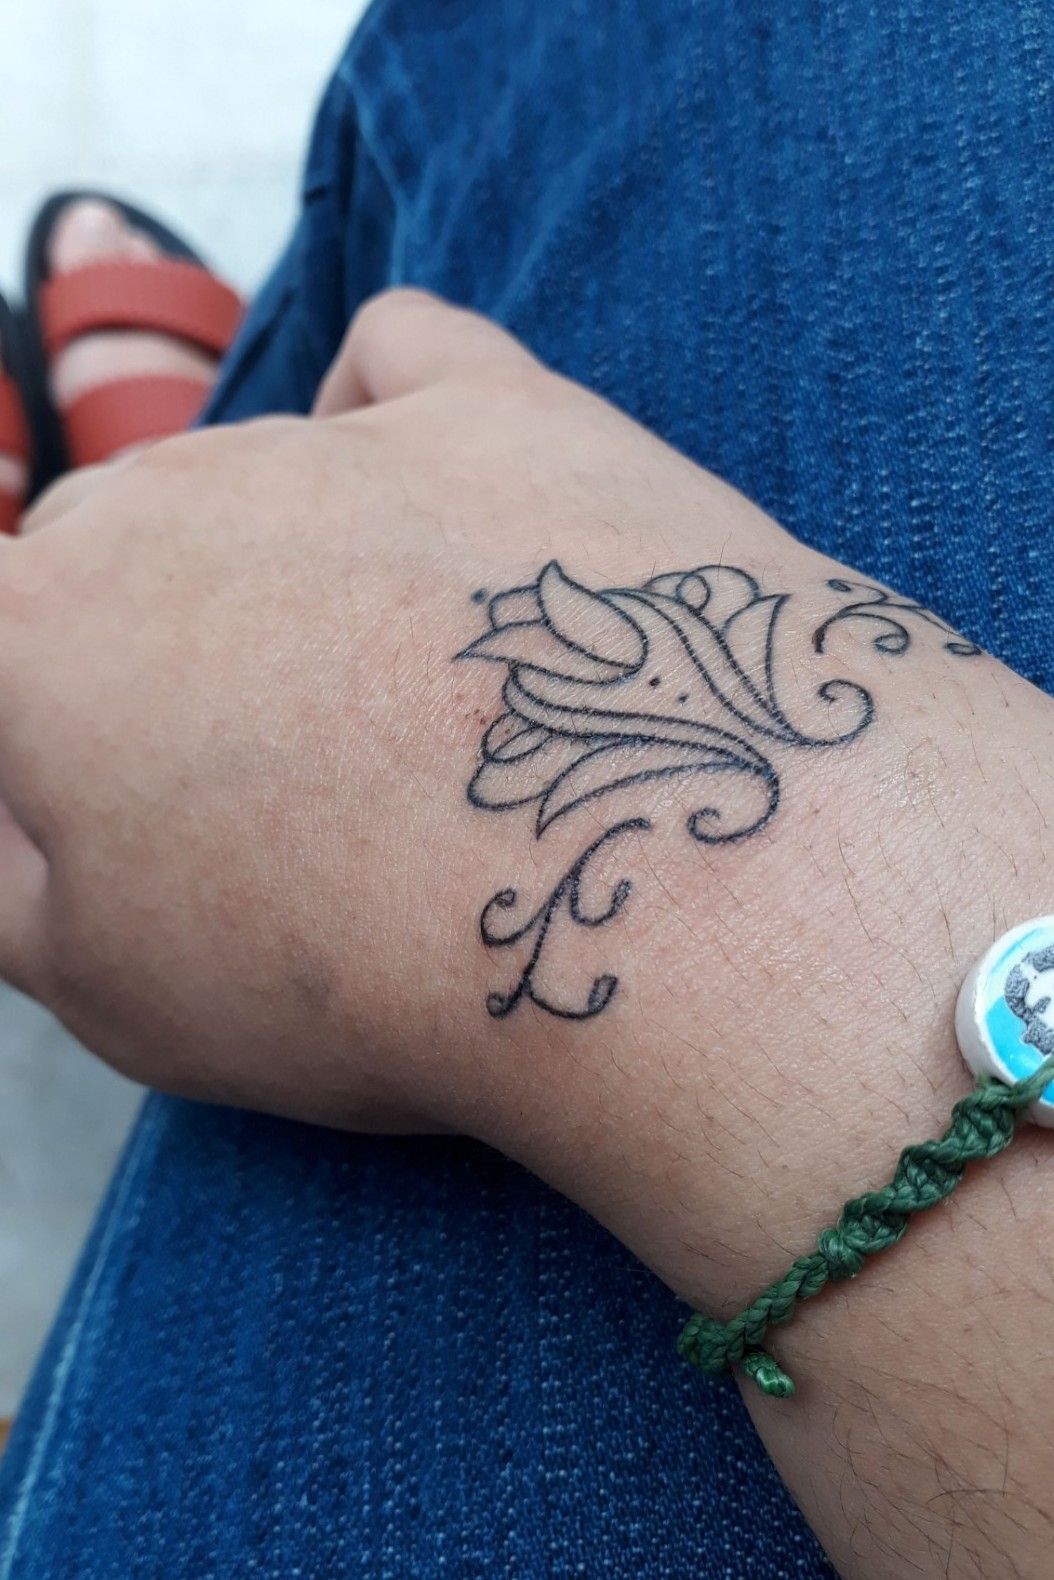 Janis Joplin  Vickie S proves shes a fan with this real Janis inspired wrist  tattoo  Facebook